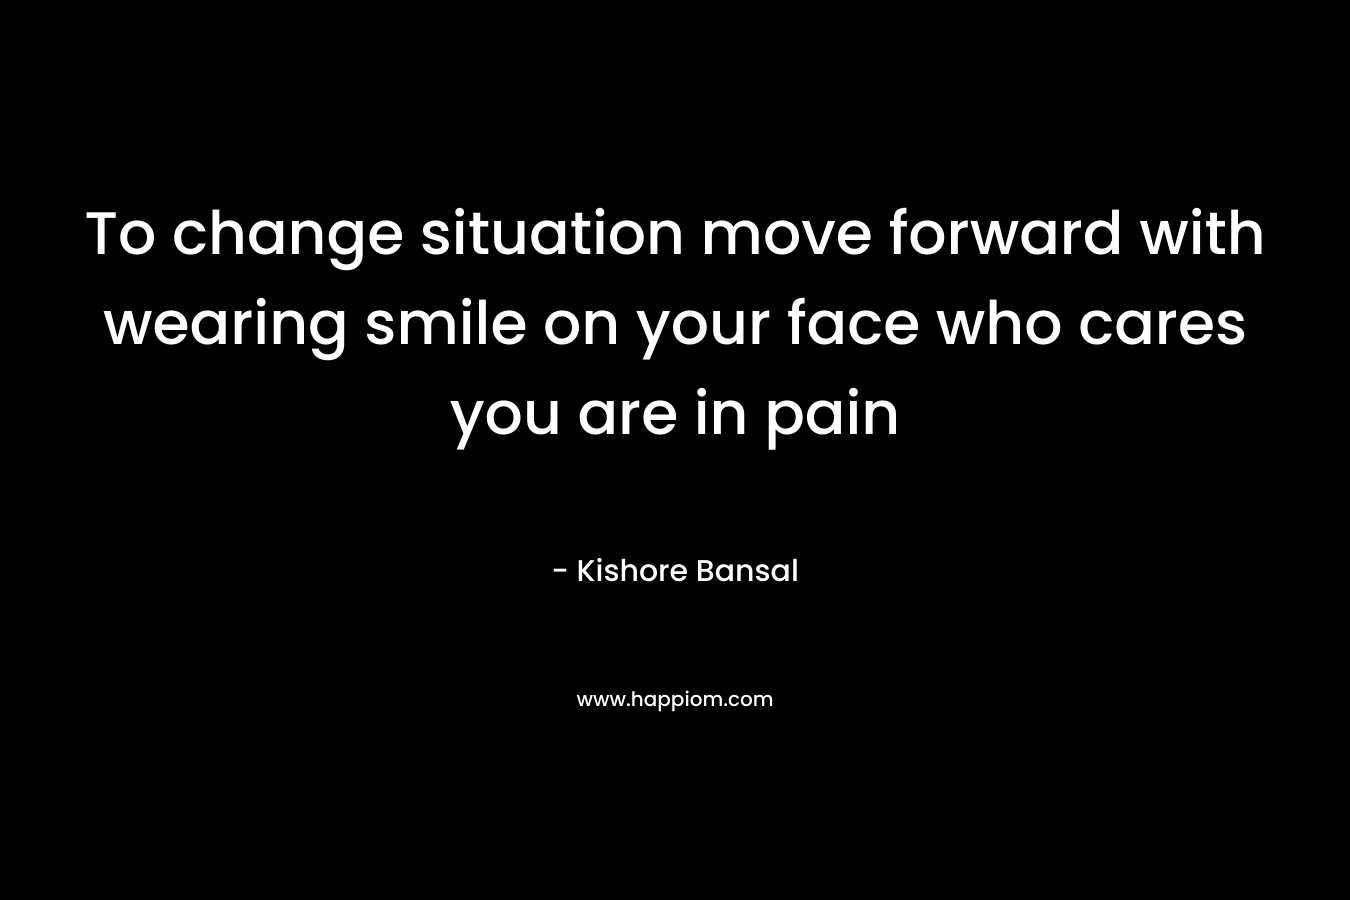 To change situation move forward with wearing smile on your face who cares you are in pain – Kishore Bansal